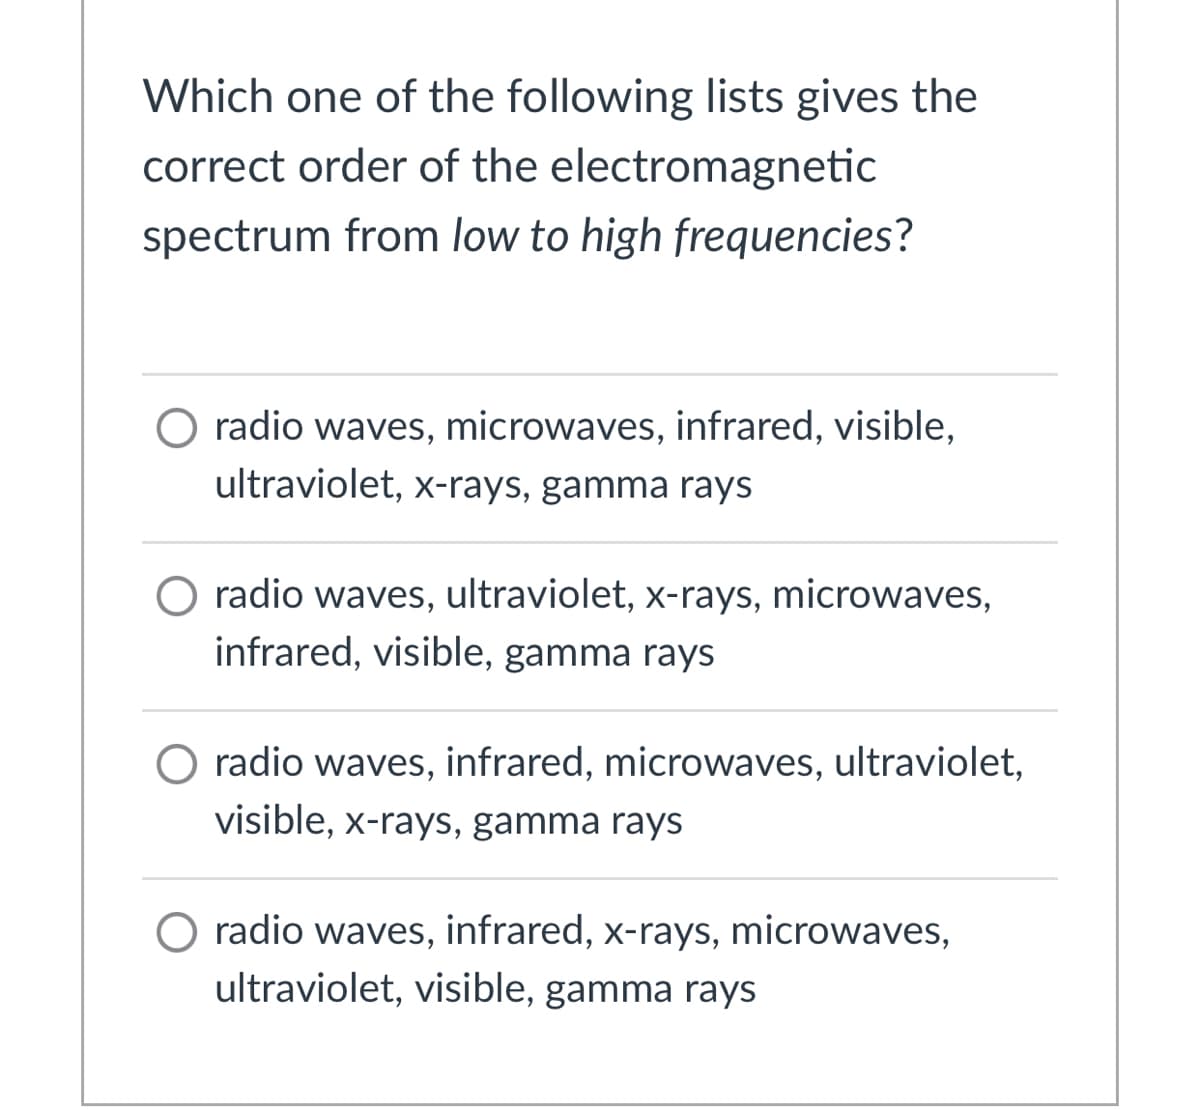 Which one of the following lists gives the
correct order of the electromagnetic
spectrum from low to high frequencies?
O radio waves, microwaves, infrared, visible,
ultraviolet, x-rays, gamma rays
O radio waves, ultraviolet, x-rays, microwaves,
infrared, visible, gamma rays
O radio waves, infrared, microwaves, ultraviolet,
visible, x-rays, gamma rays
O radio waves, infrared, x-rays, microwaves,
ultraviolet, visible, gamma rays
